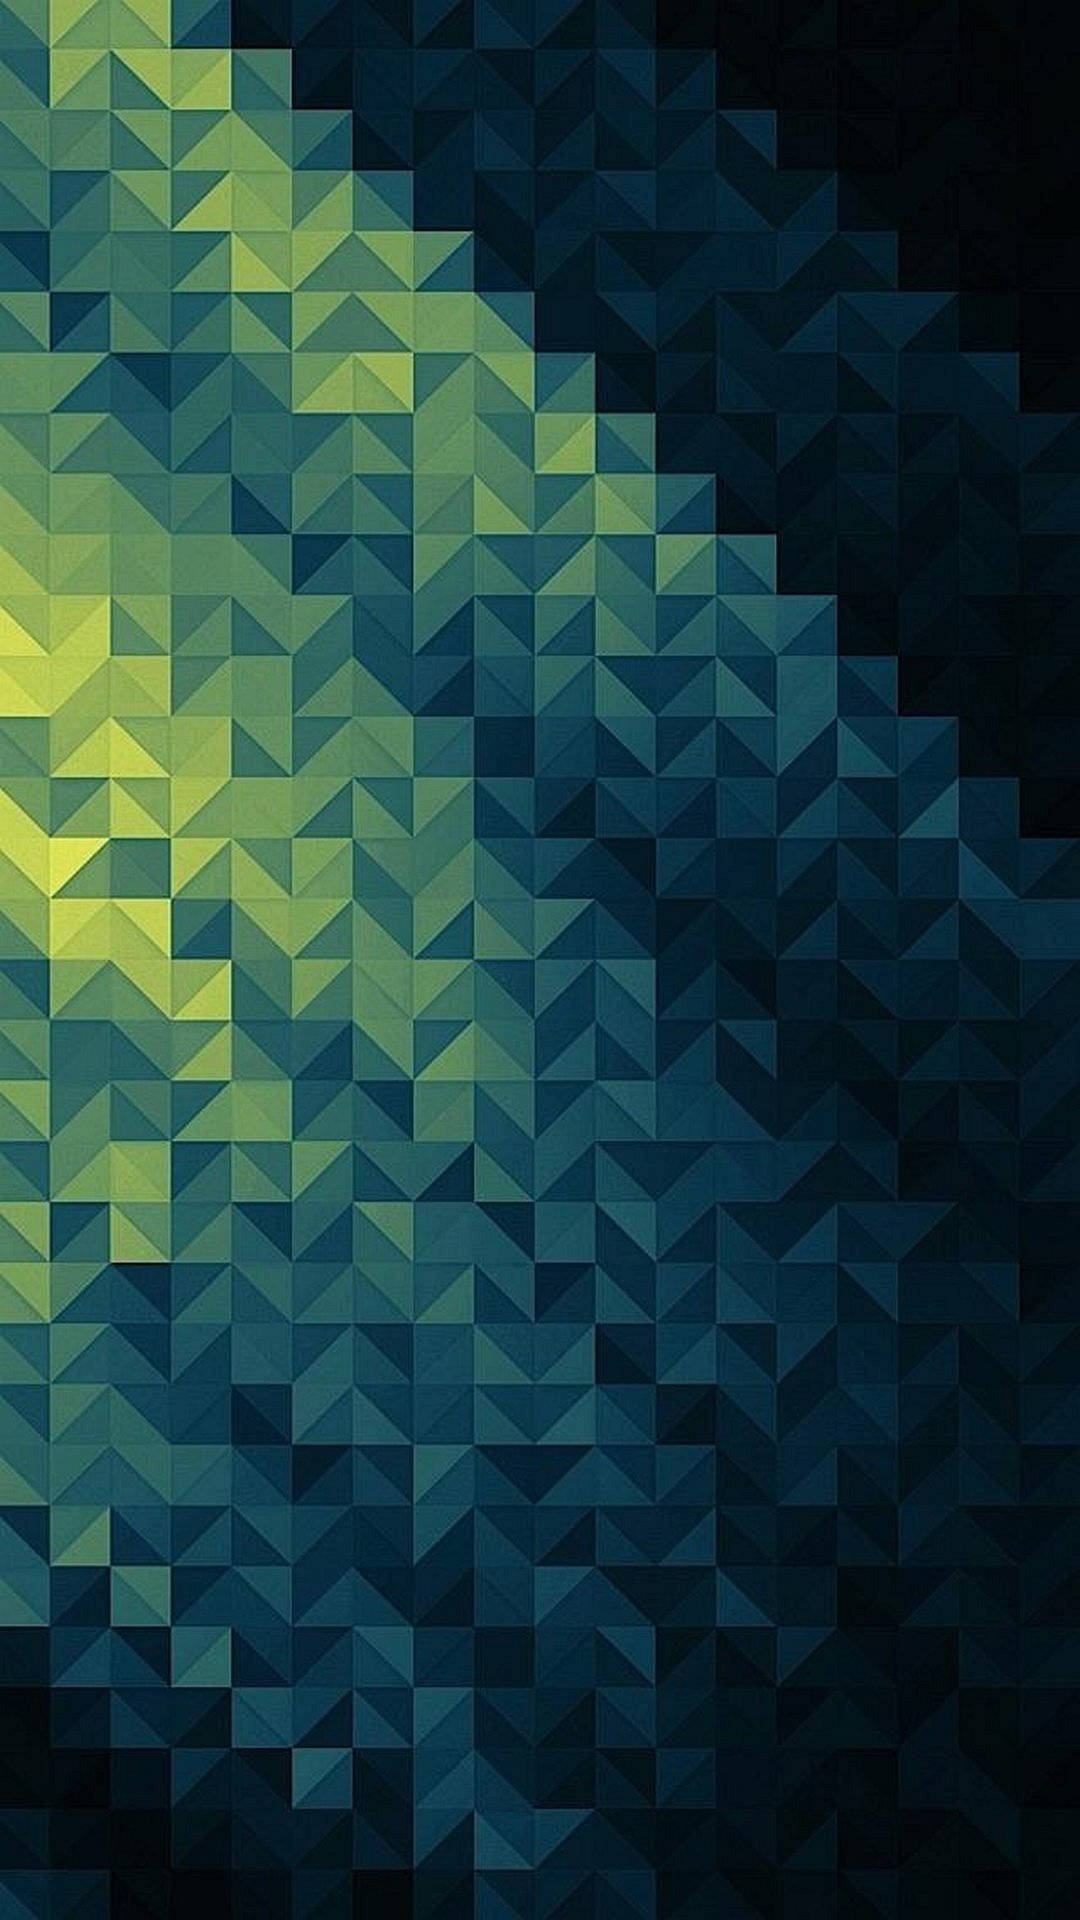 Yellow And Blue Geometric Patterns Cool Android Background